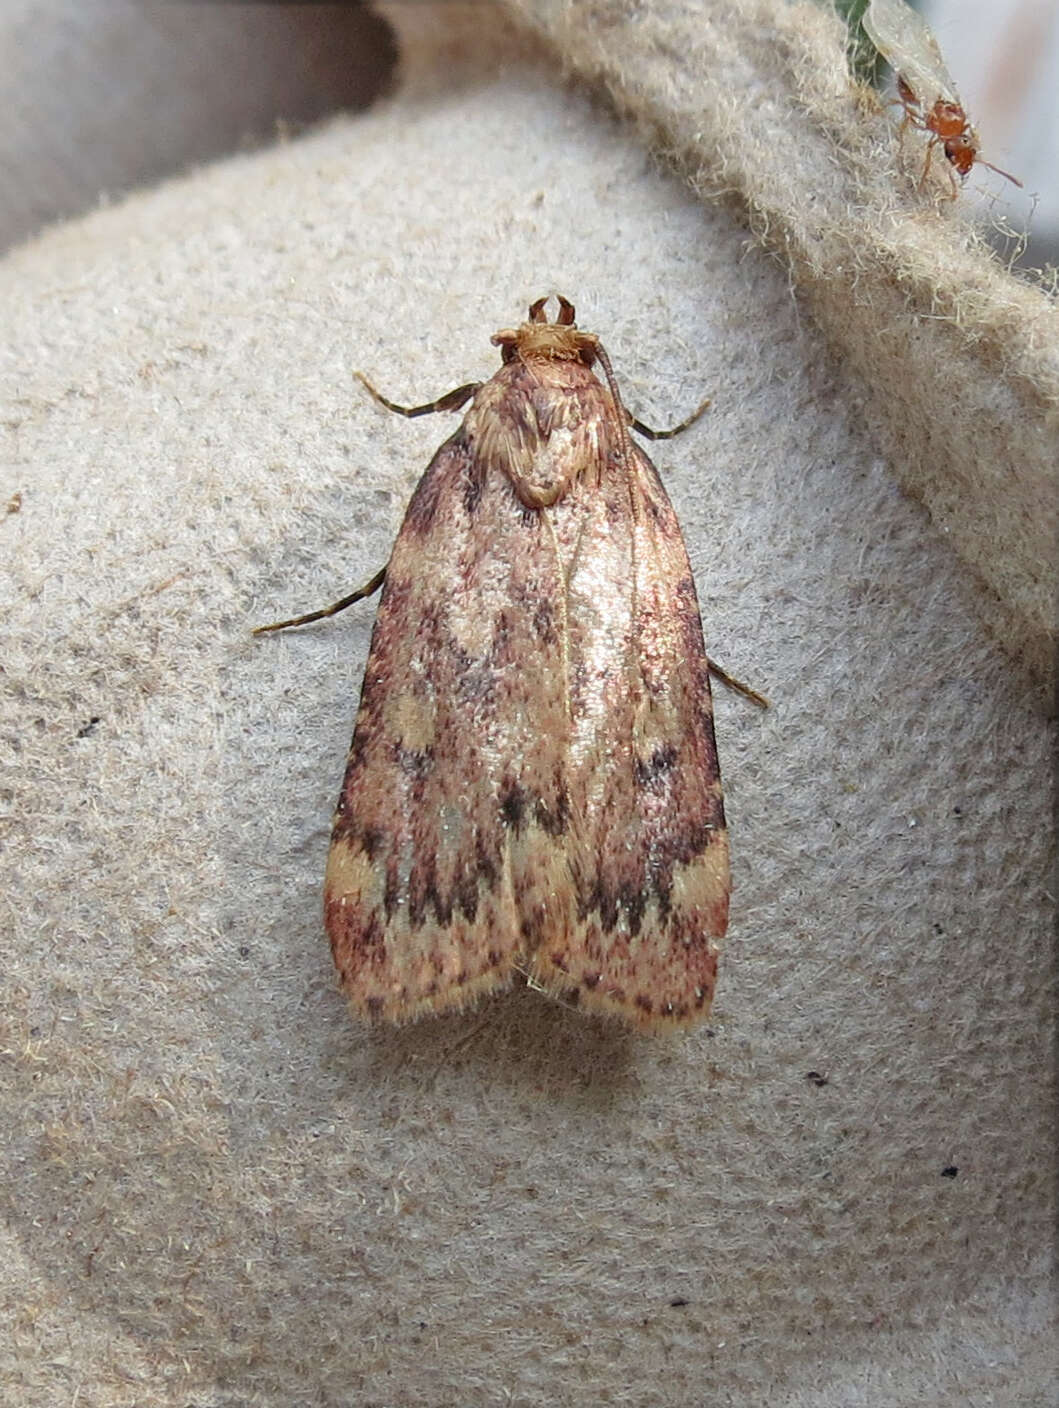 Image of Grease Moth